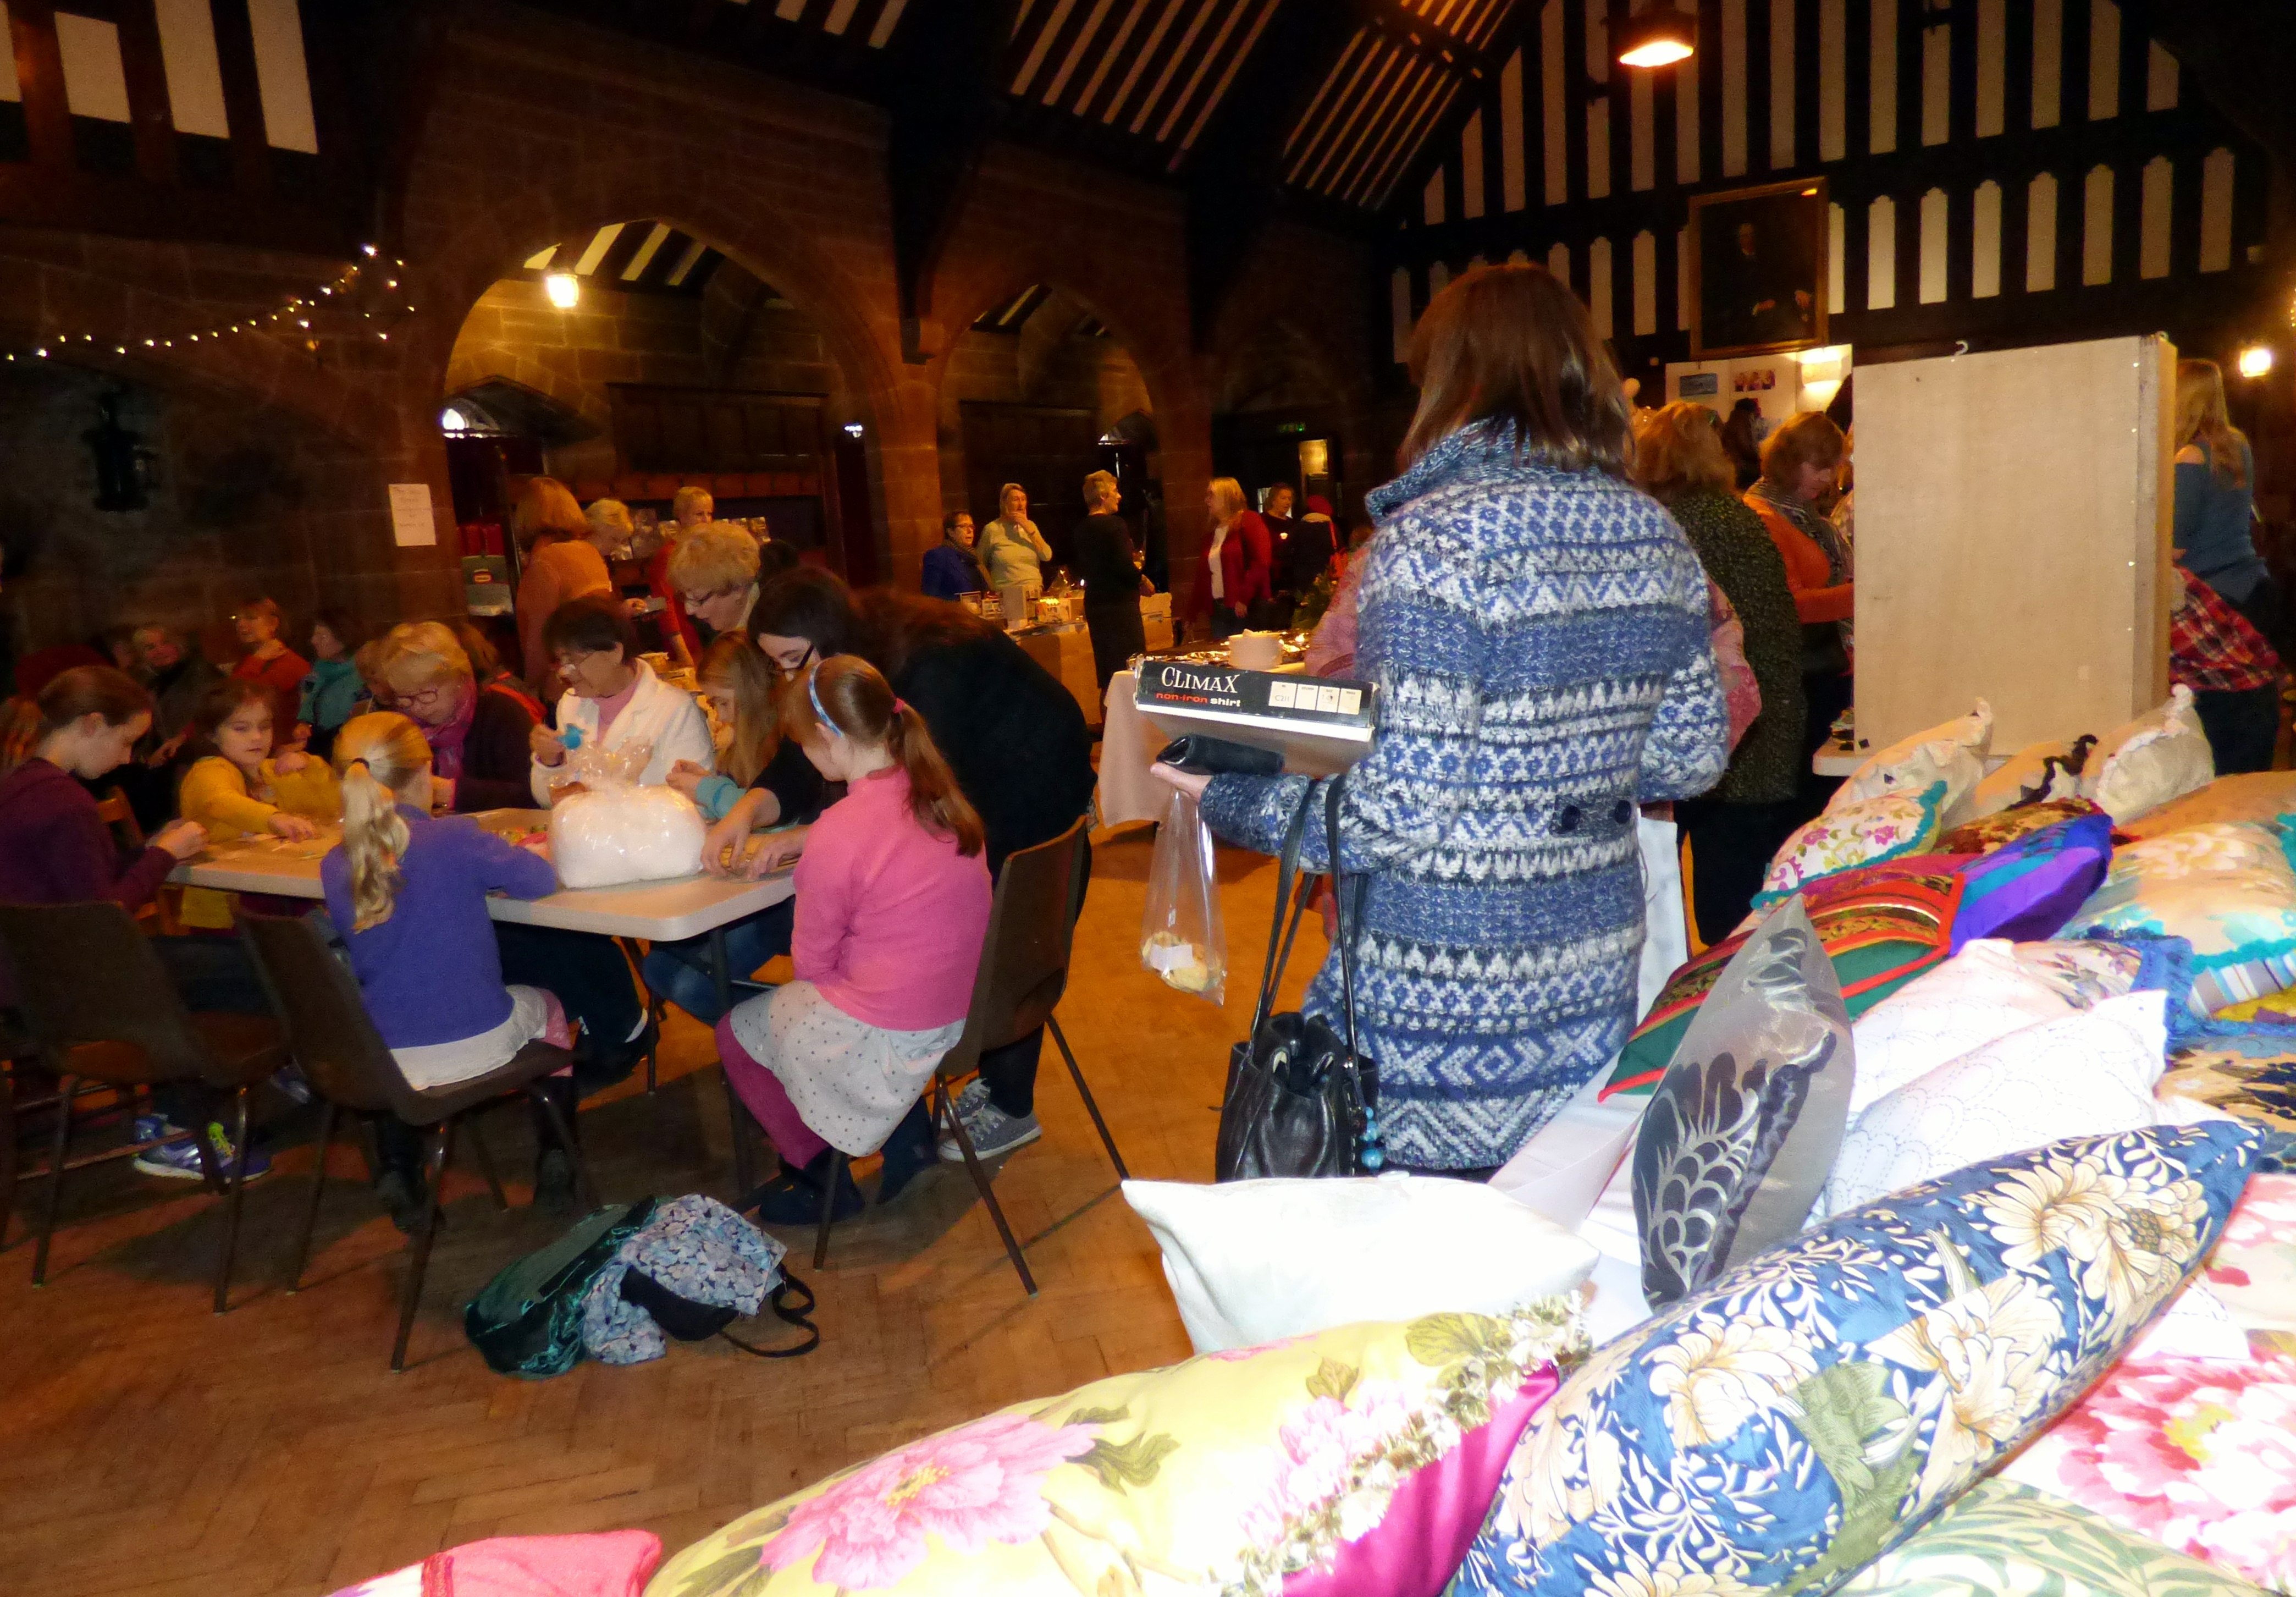 MEG winter Fair 2016 with our fundraising cushion stall in the foreground